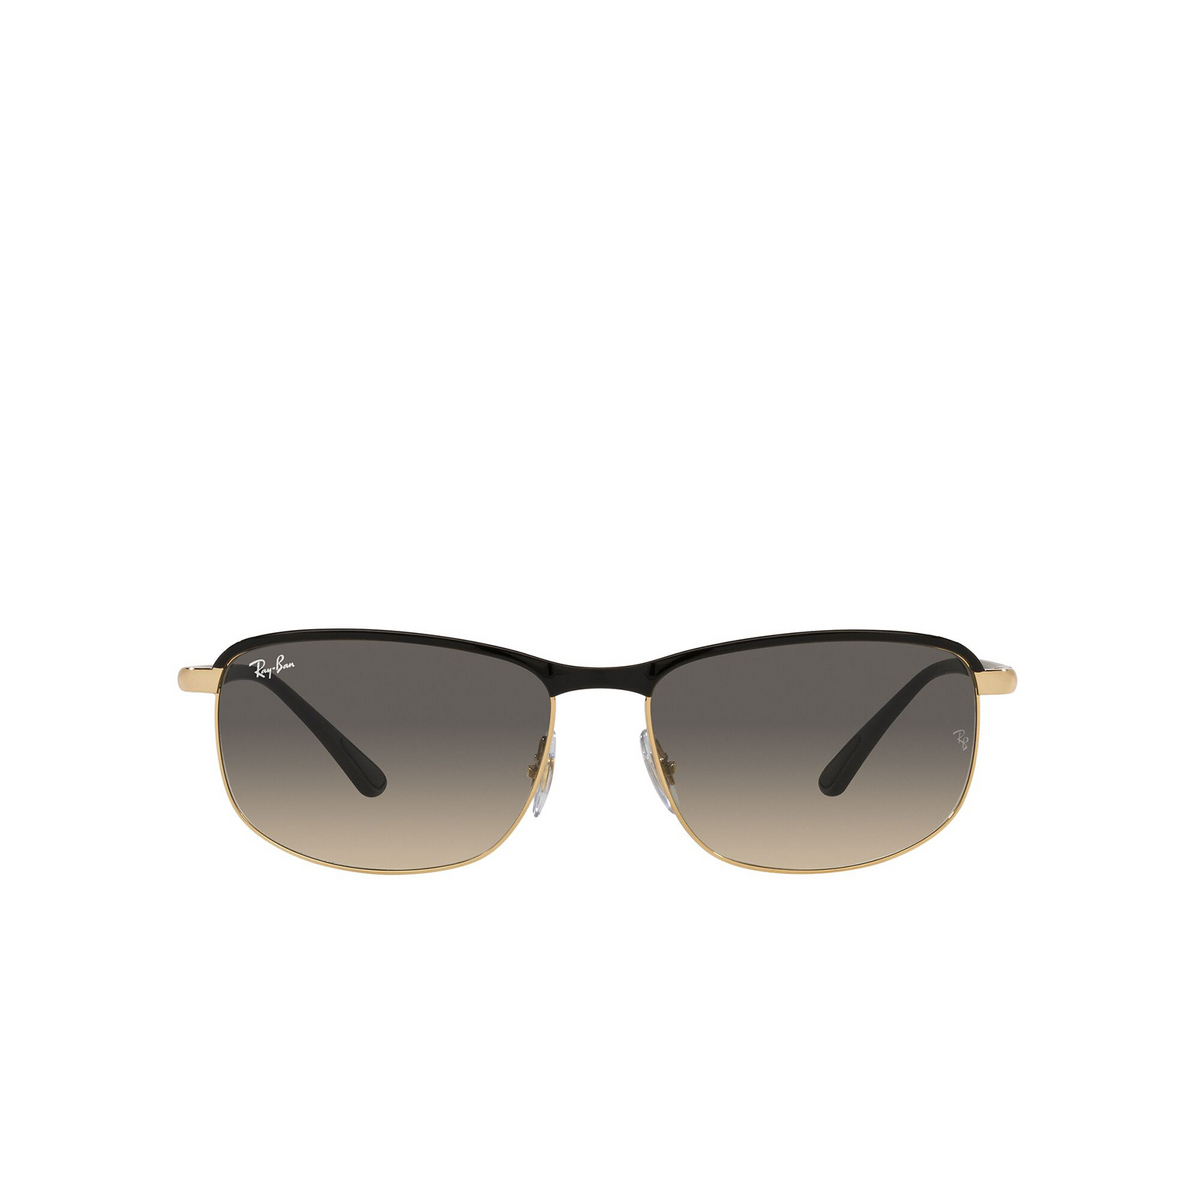 Ray-Ban RB3671 Sunglasses 187/32 Black on Arista - front view